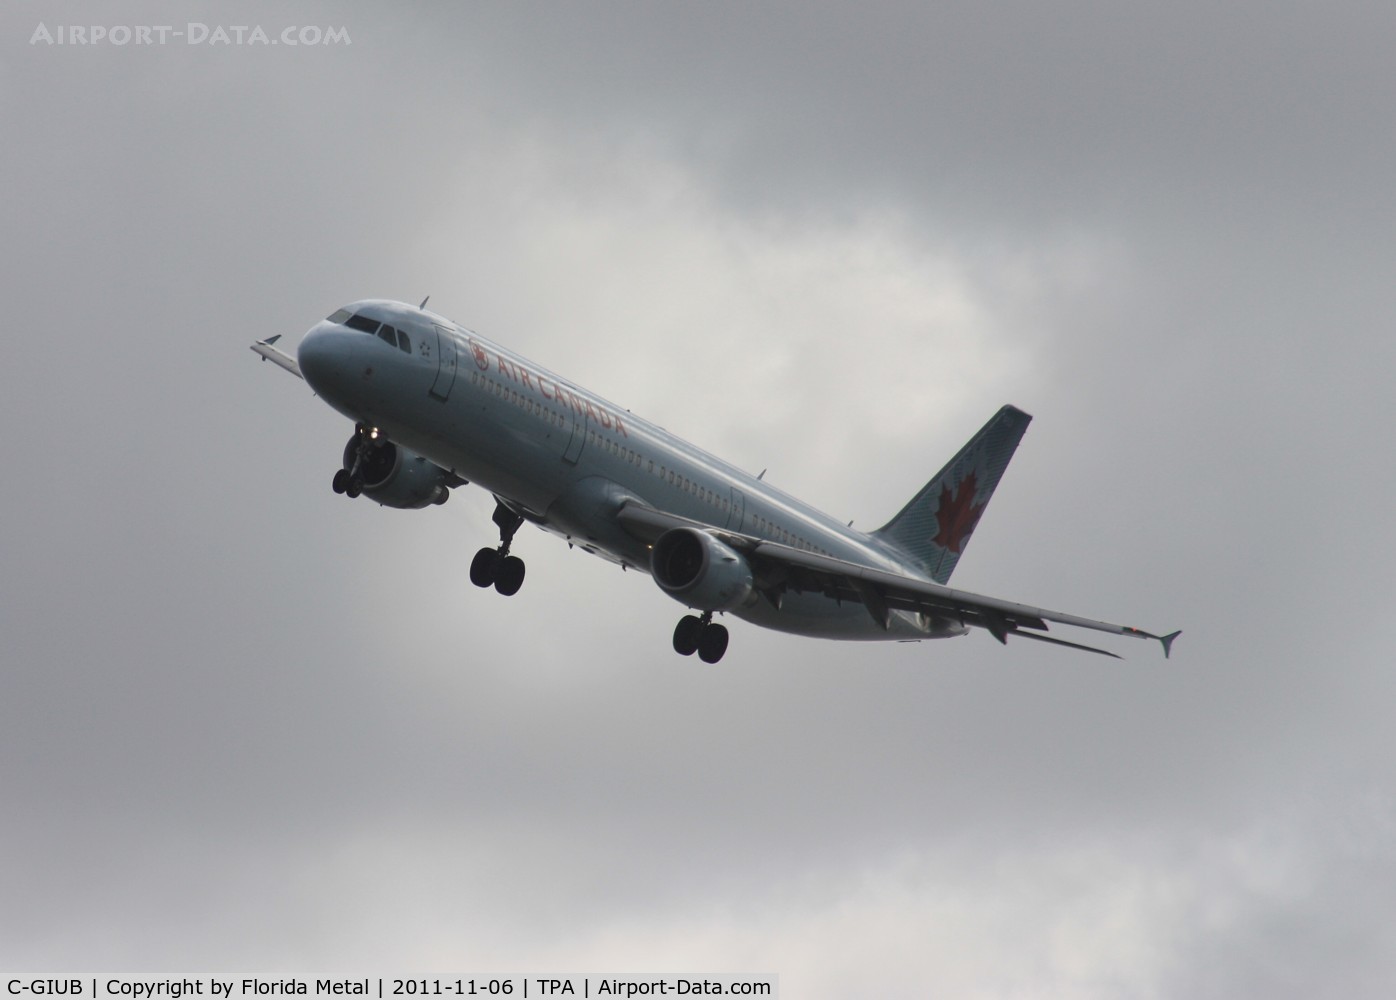 C-GIUB, 2001 Airbus A321-211 C/N 1623, Air Canada making Kai Tak approach at Tampa due to airshow at nearby MacDill AFB